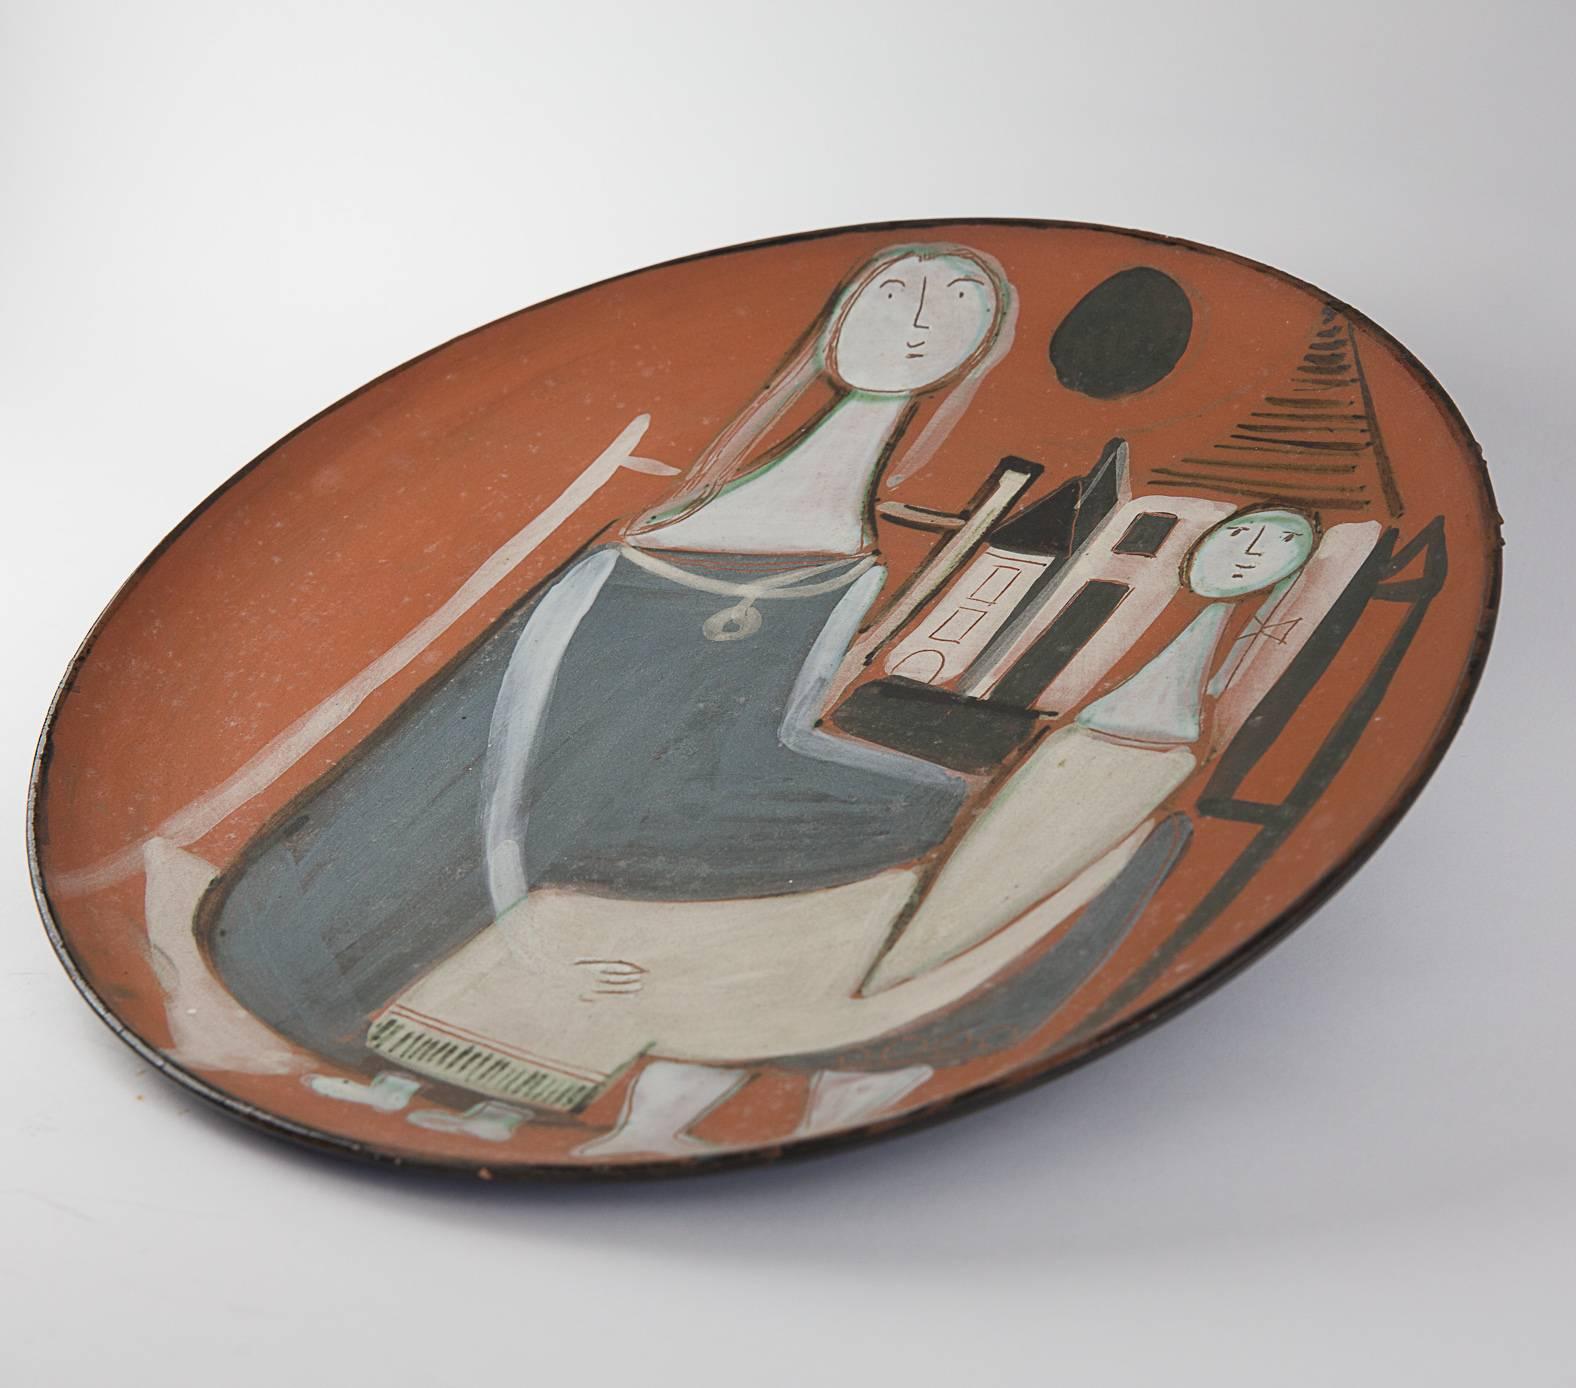 Jacques Innocenti is considered as being the most talented and inventive ceramicist of Vallauris. He was obviously inspired by Picasso, Morandi and other major artists of the time but still succeeded although he died very early to leave a corpus of